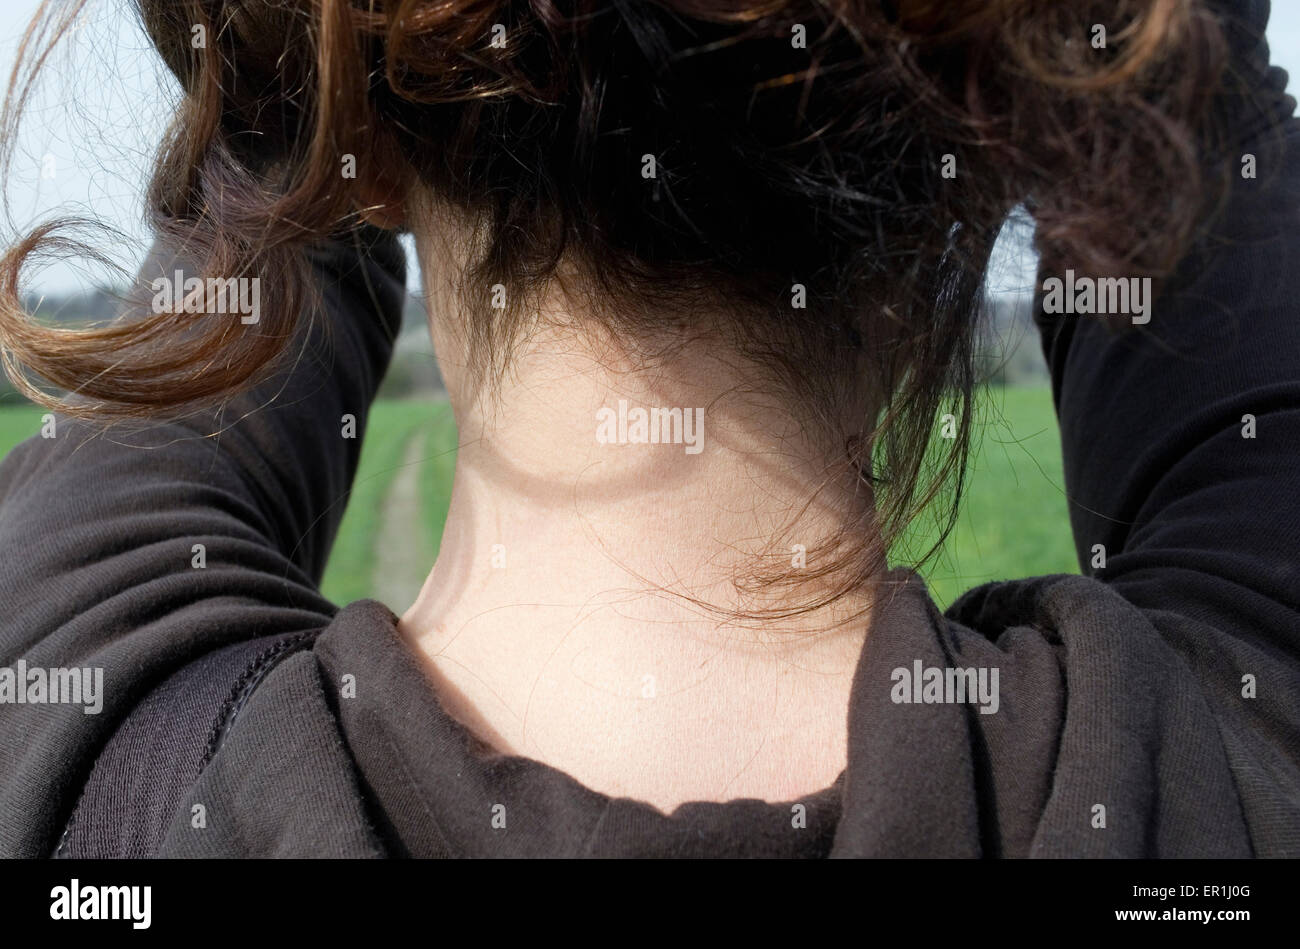 rear view of a woman's neck Stock Photo